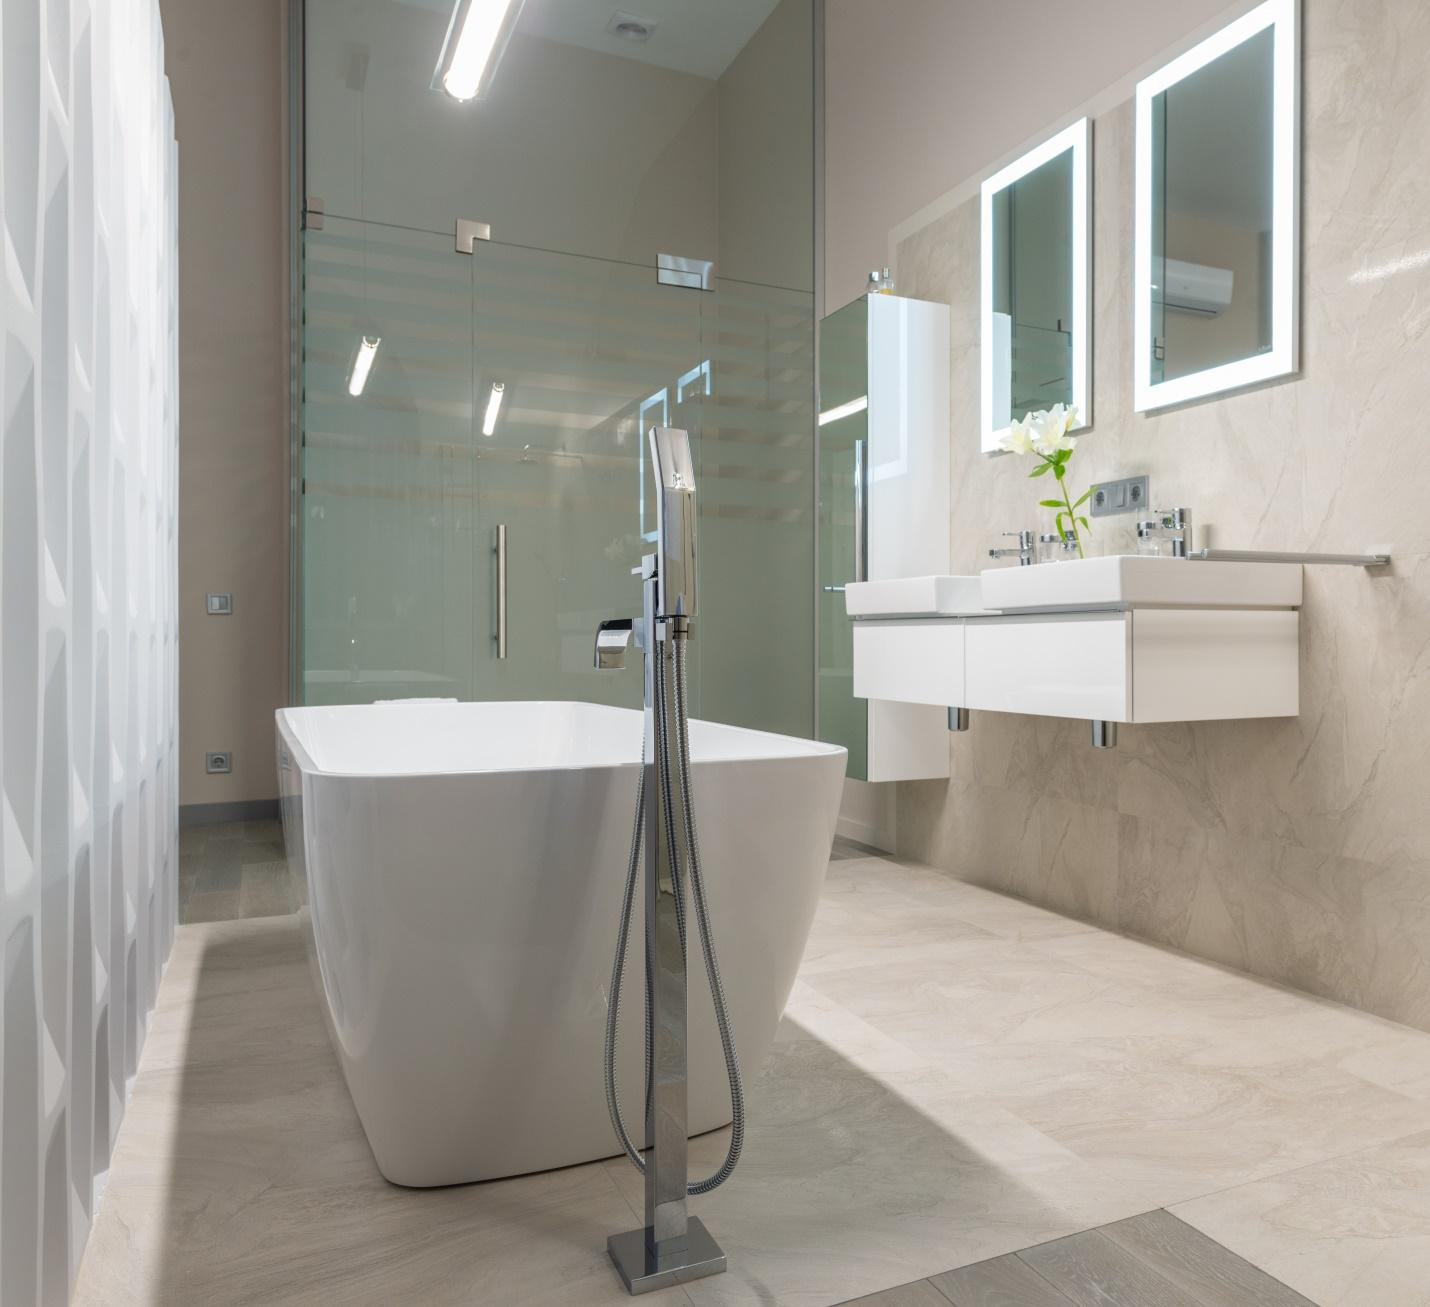 Talk to a shower door company, Austin, for replacement!